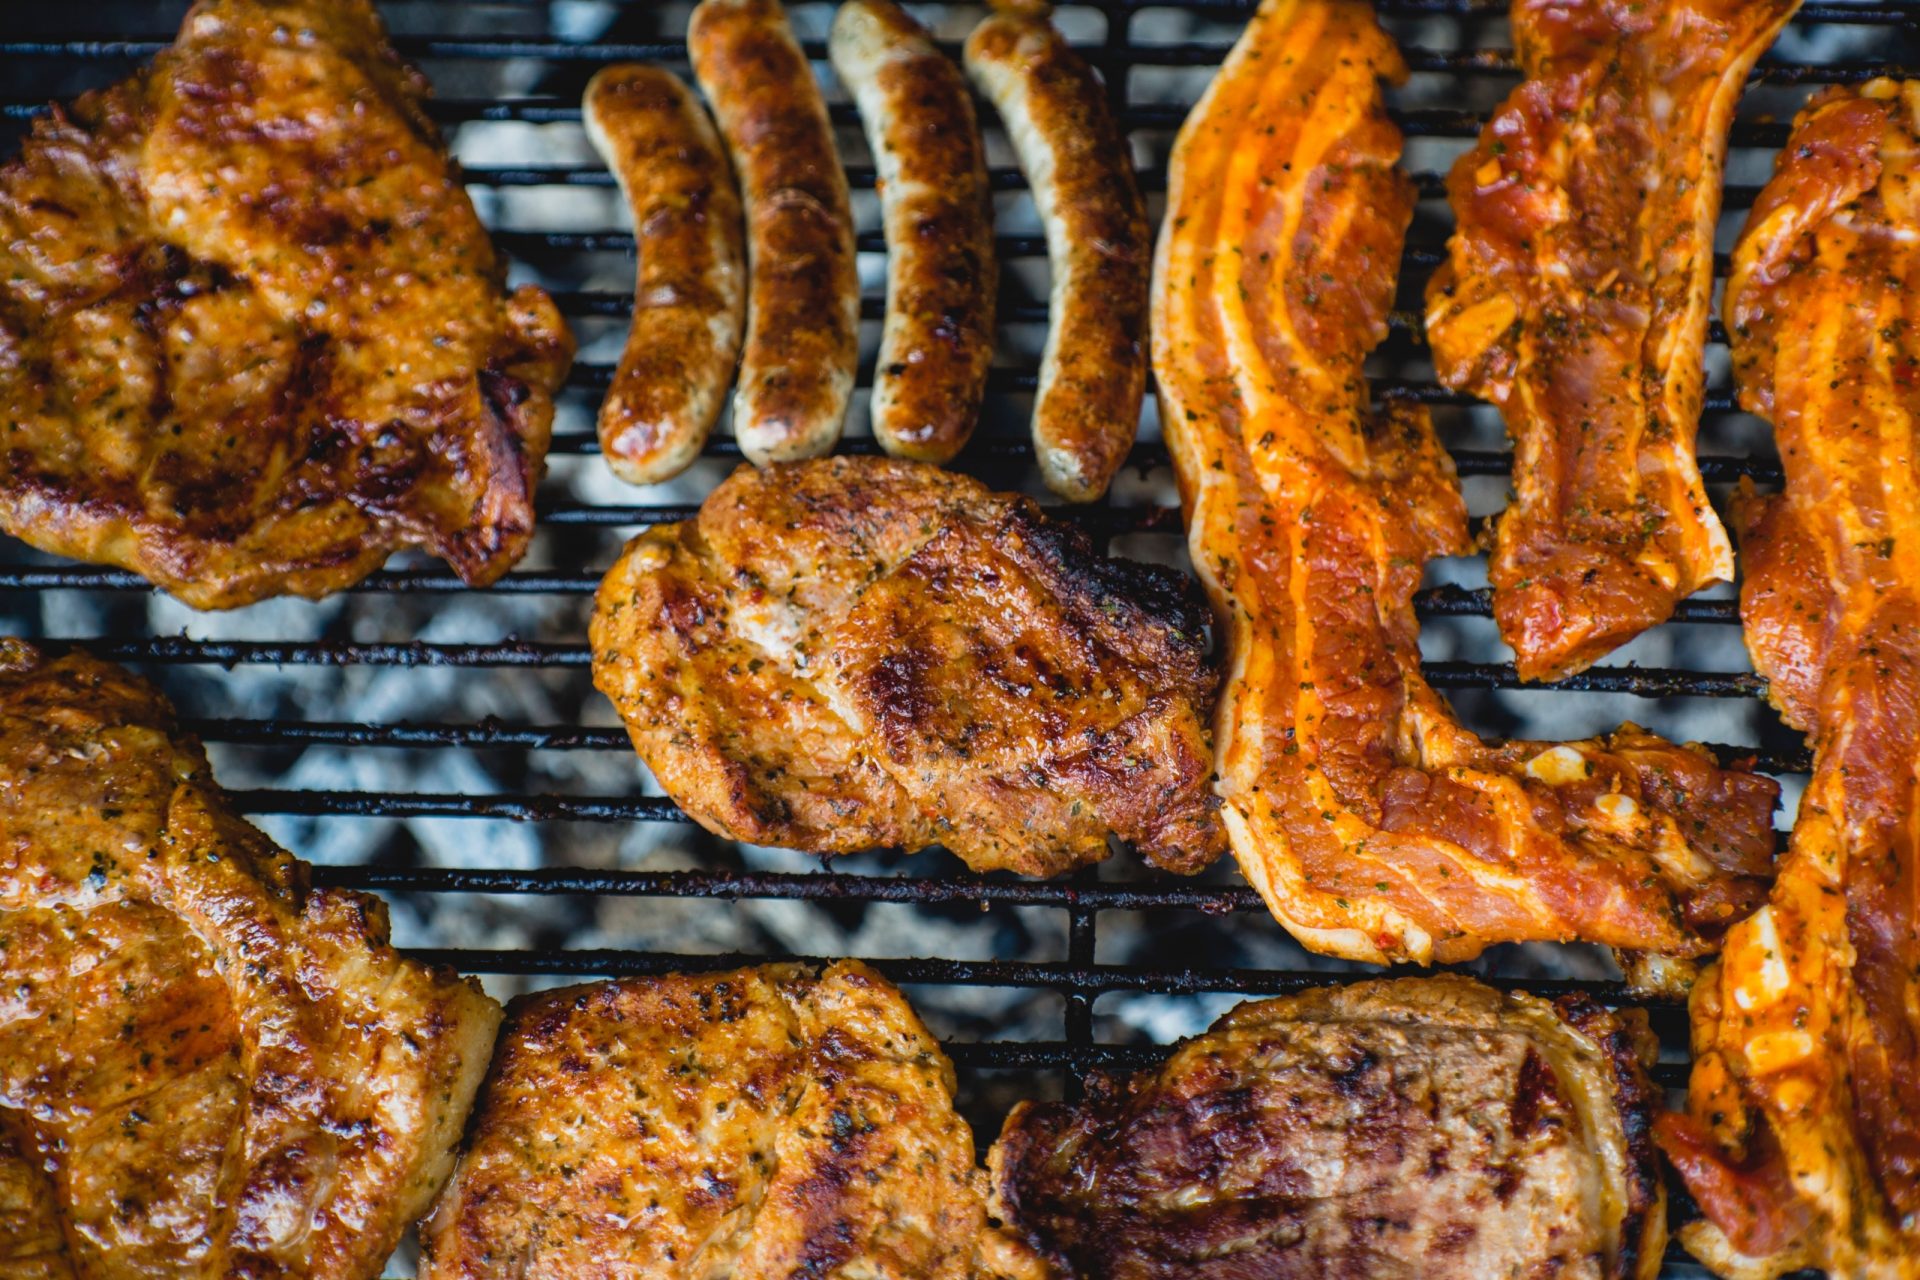 A variety of meats on a grill.